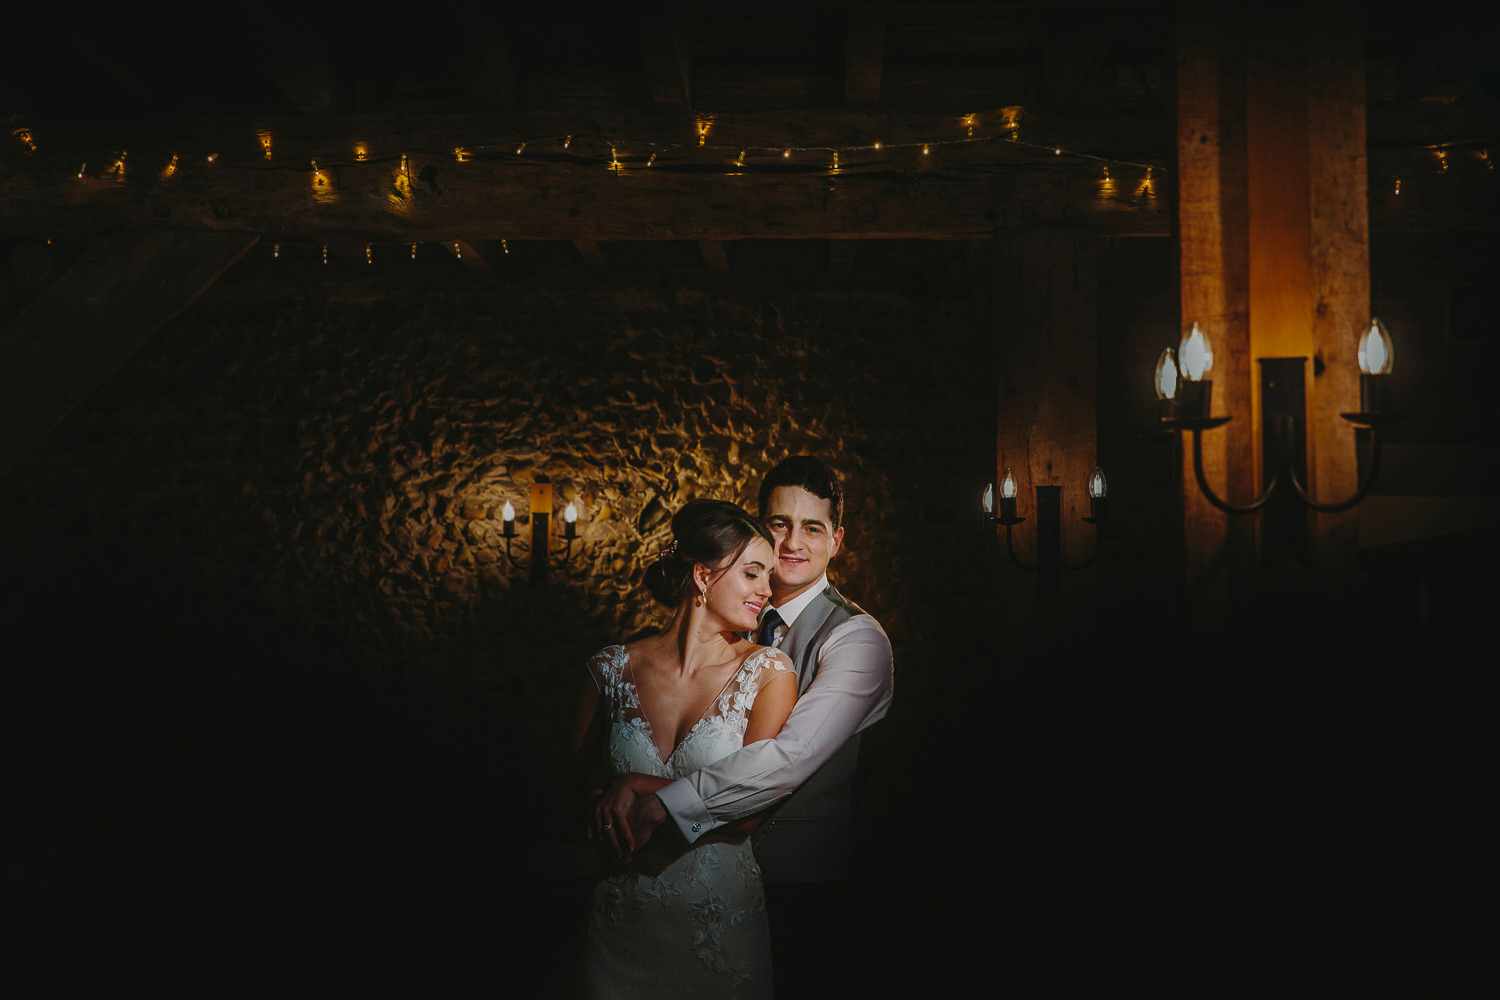 Bride and groom indoor portrait, with fairy lights and lanterns